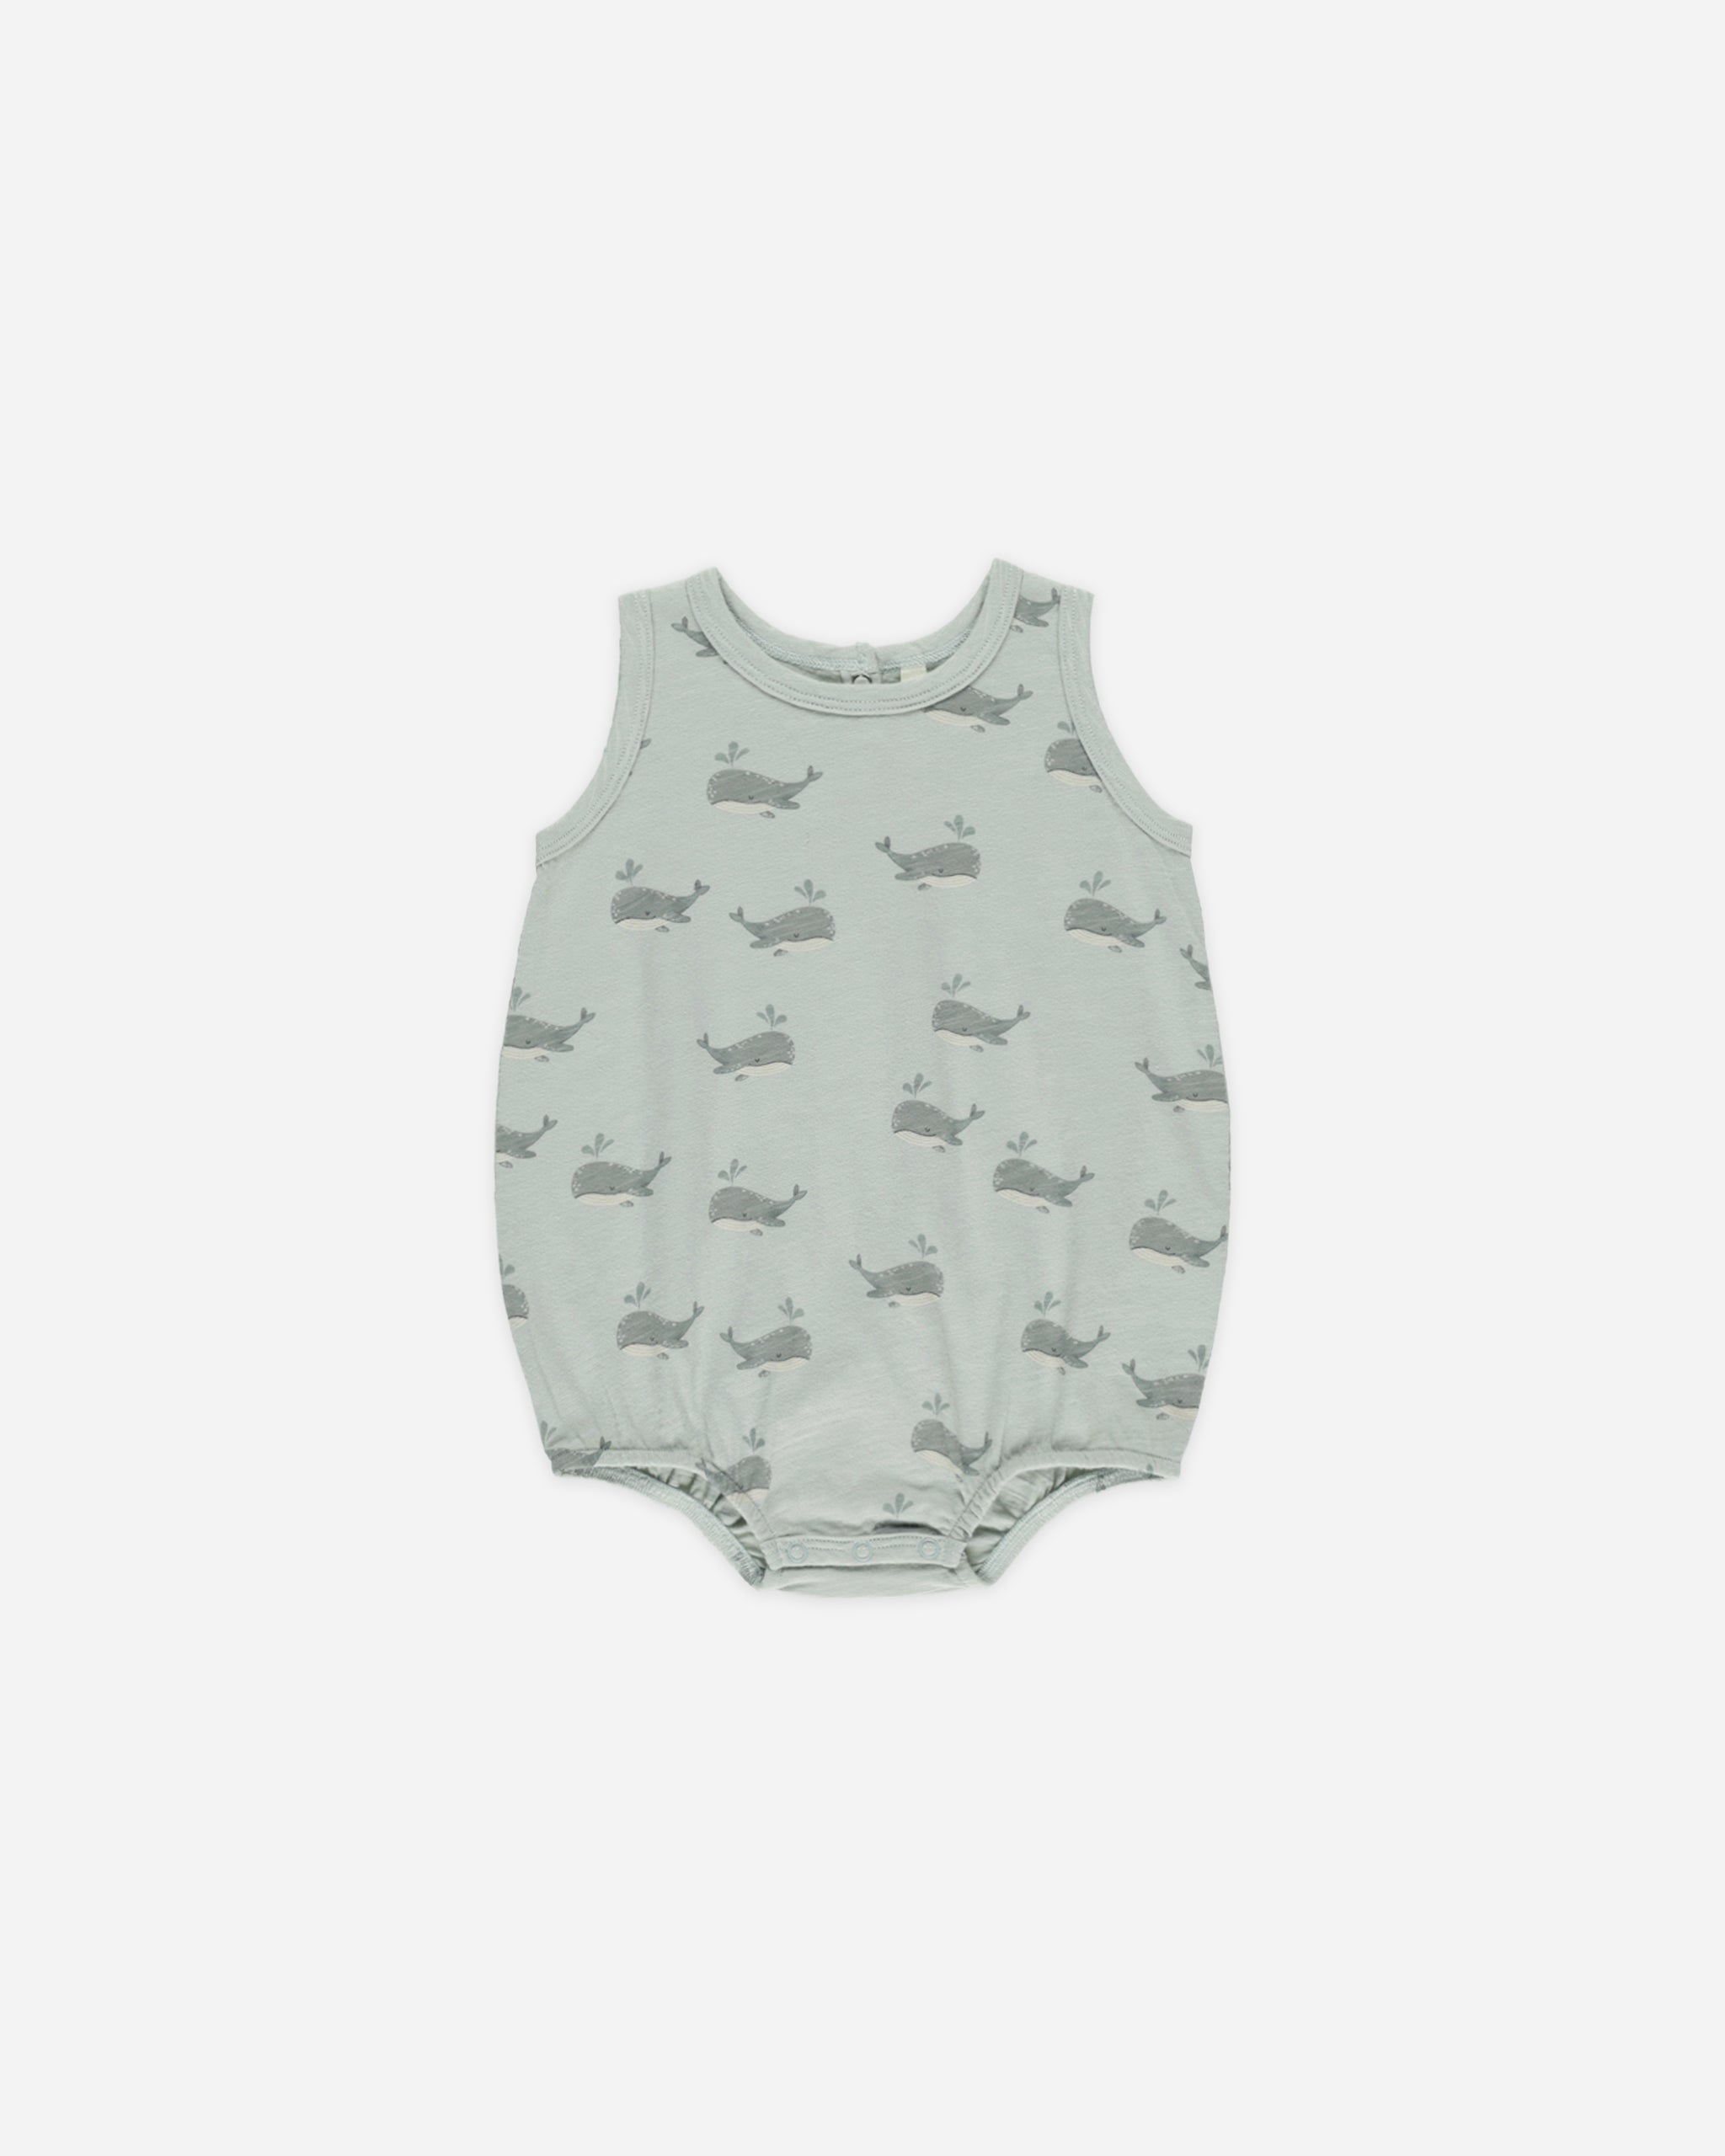 Bubble Onesie || Whales - Rylee + Cru | Kids Clothes | Trendy Baby Clothes | Modern Infant Outfits |